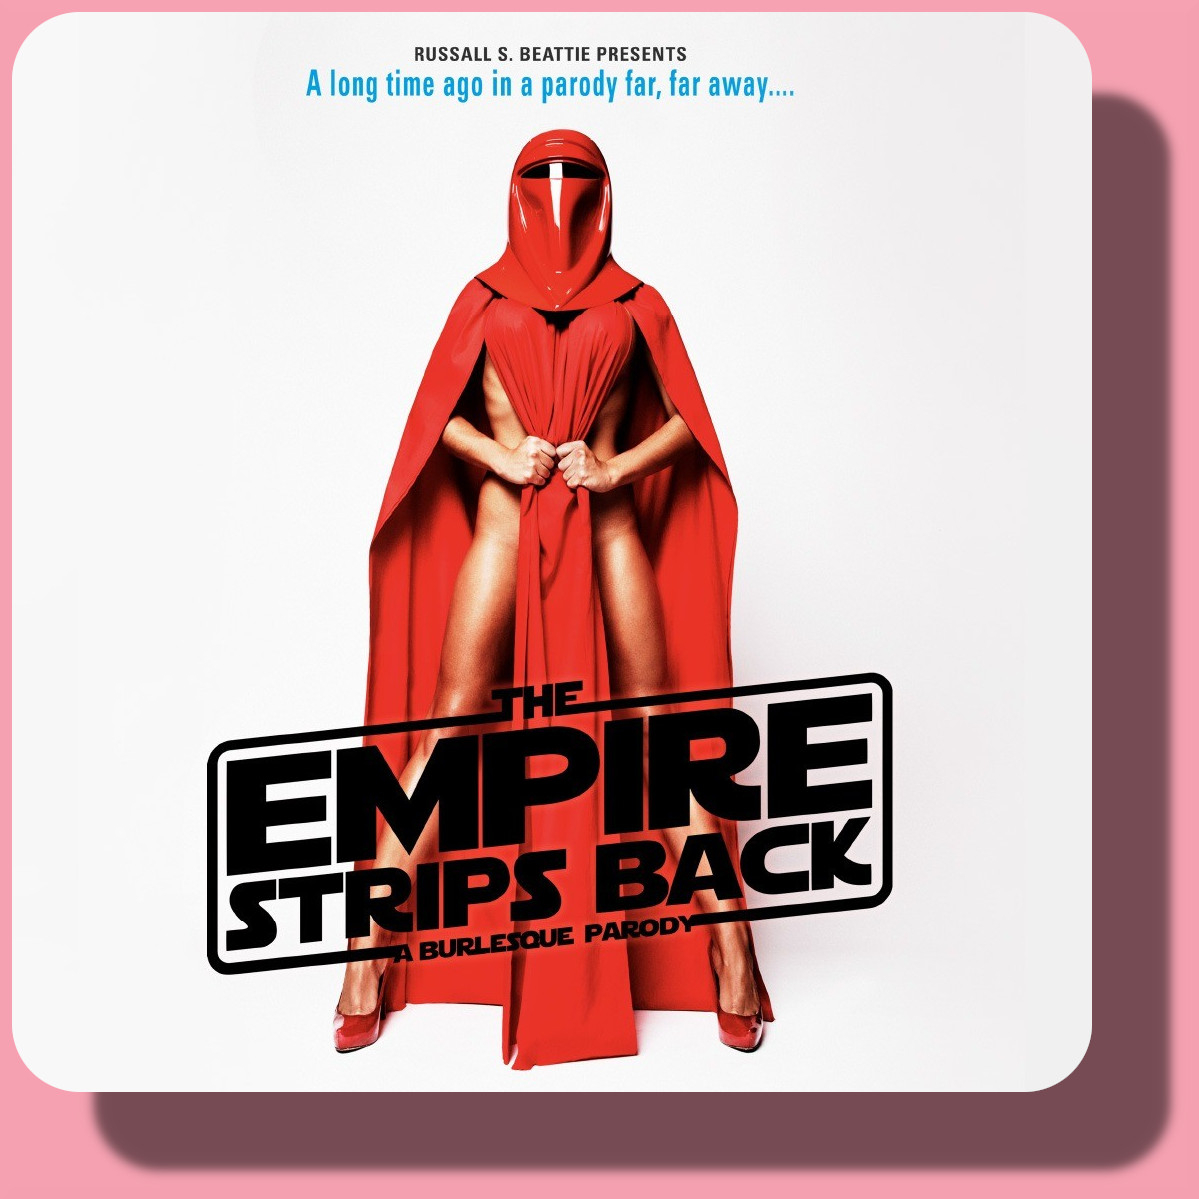 The Empire Strips Back: A Burlesque Parody in Vancouver